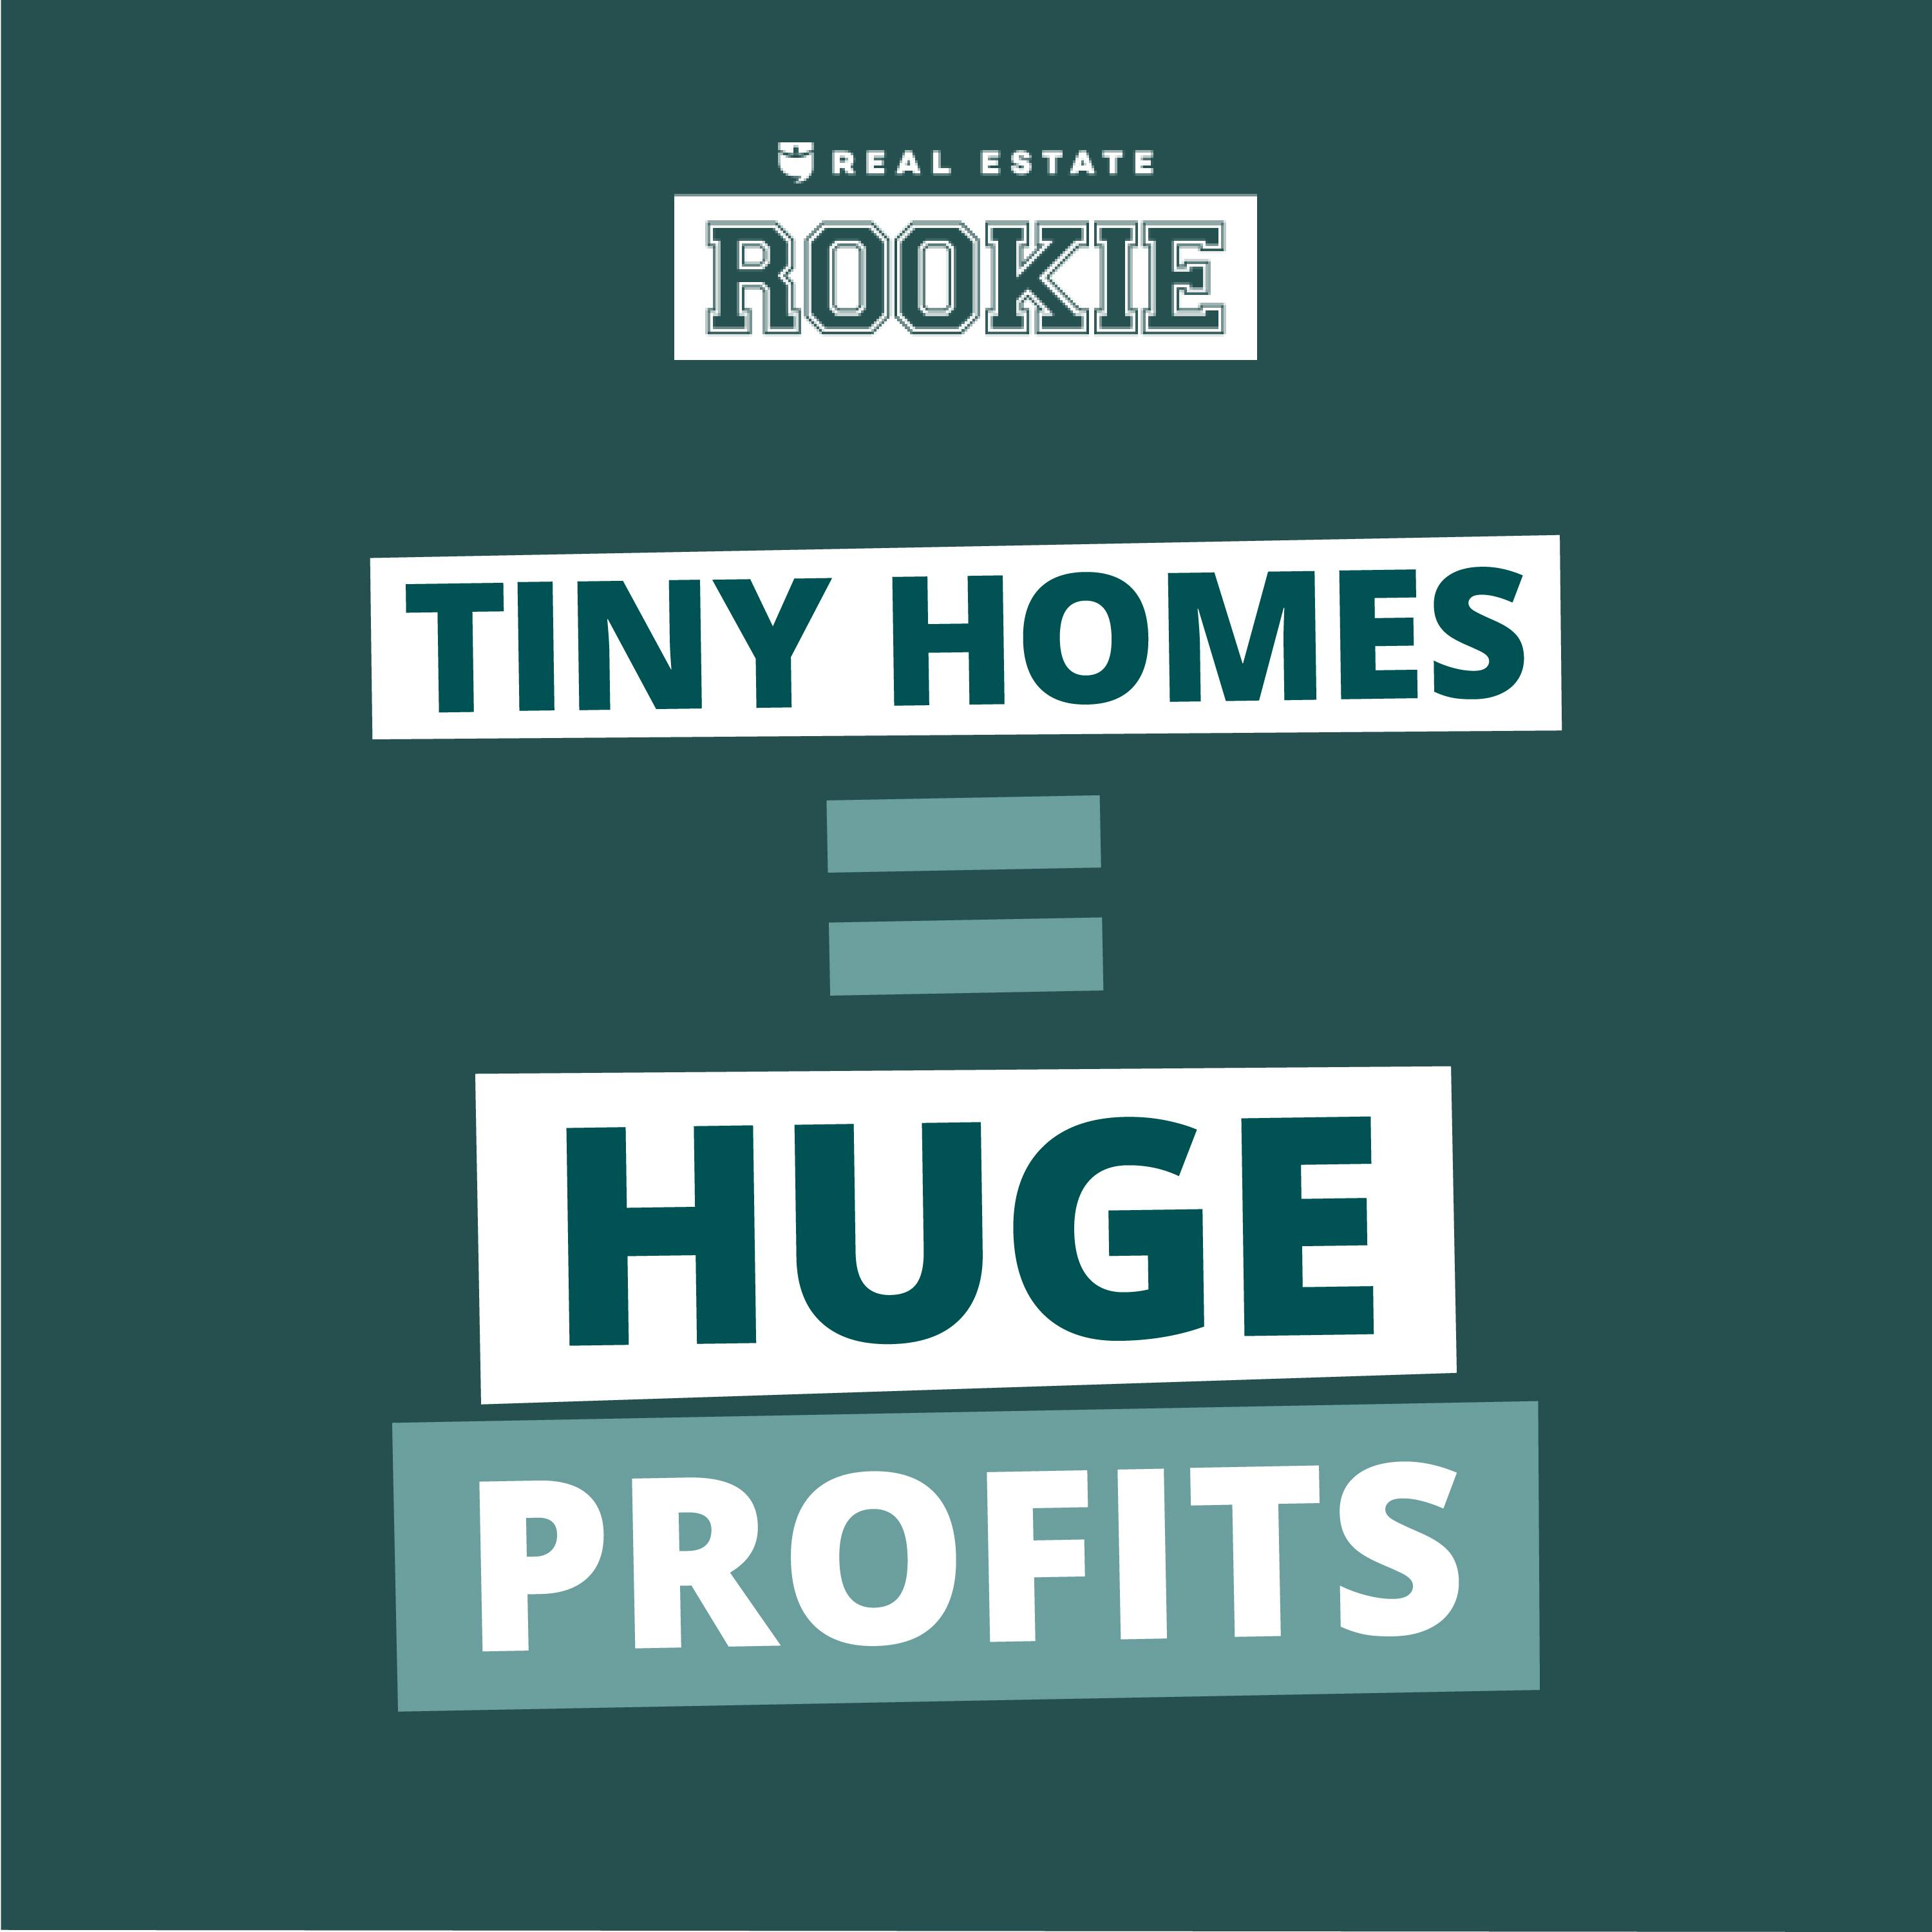 225: Tiny Homes, Huge Profits: $6,000 a Month from 1 Property! w/Josiah Hein